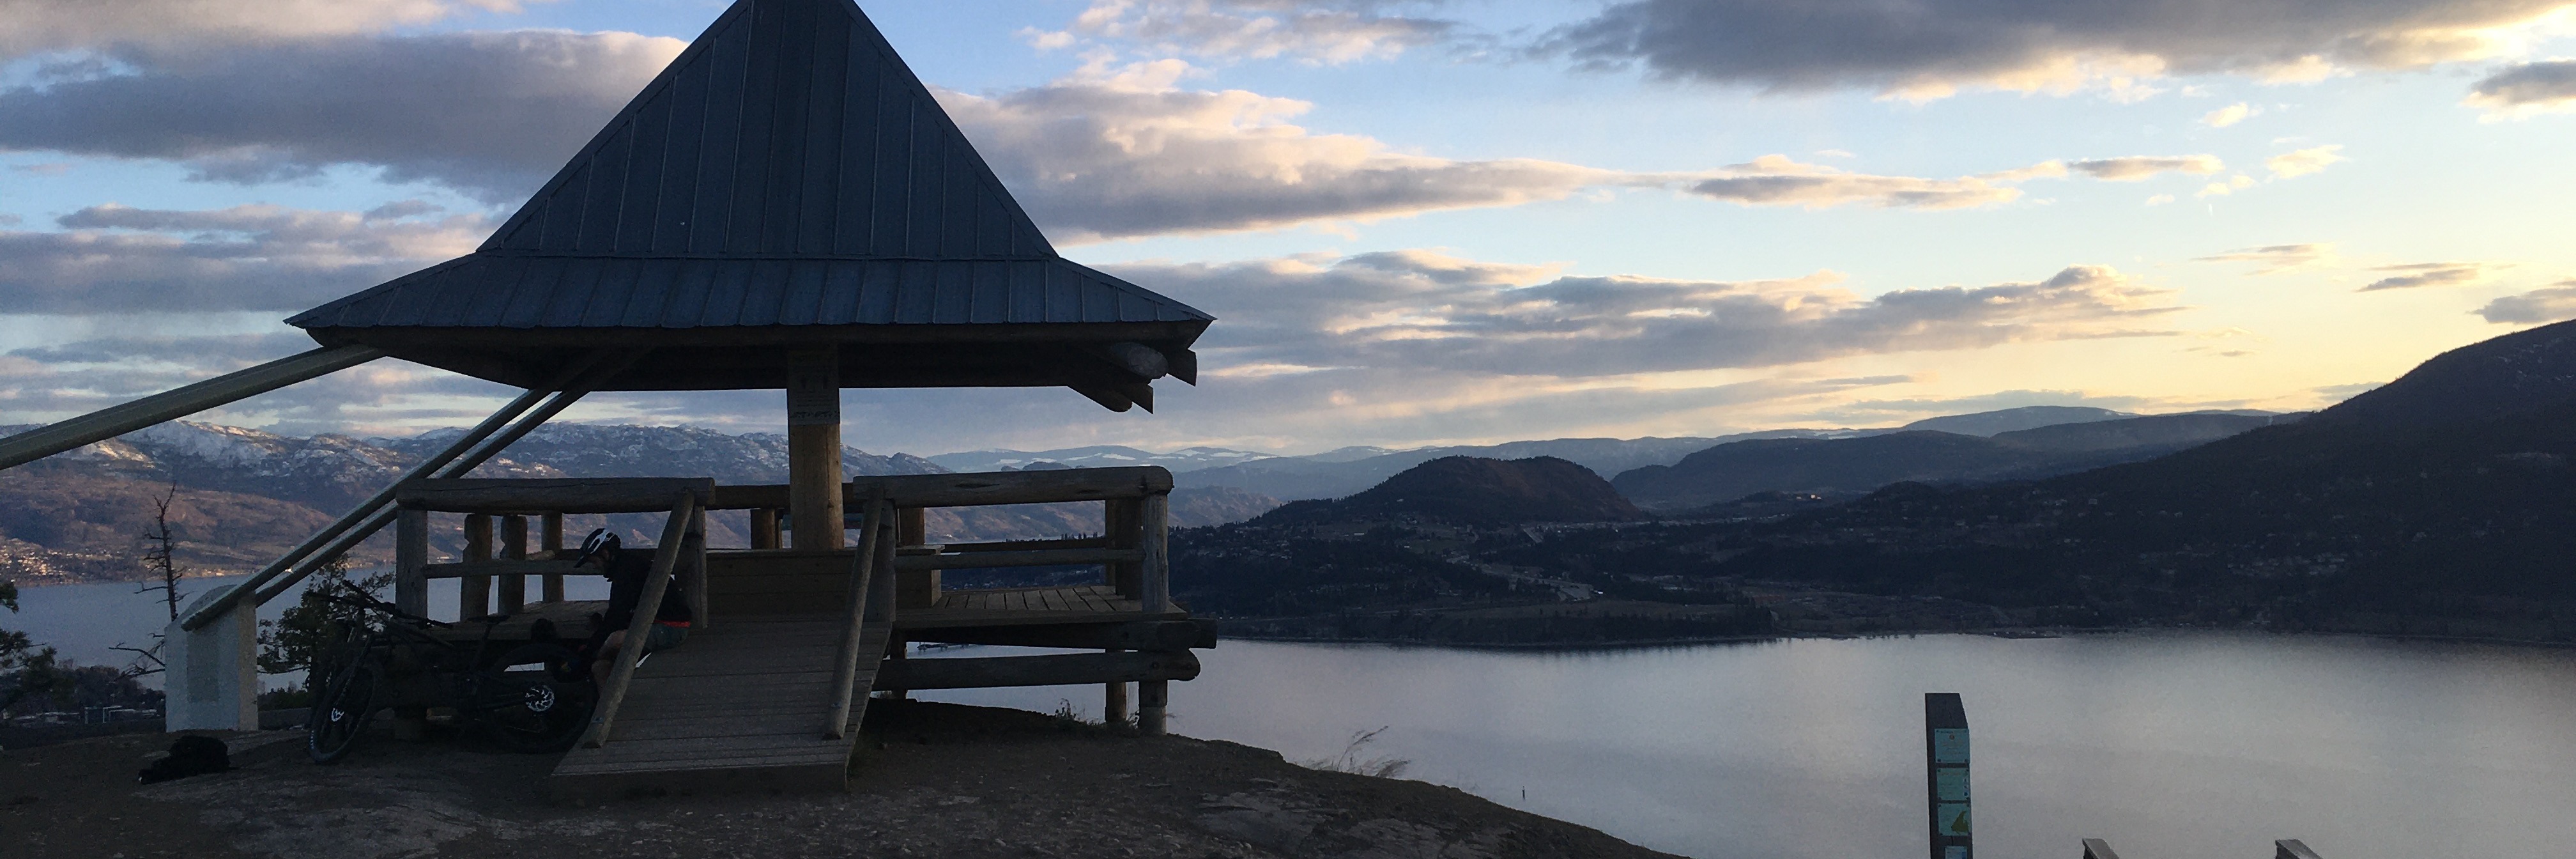 View of the Pagoda and lake in the backdrop from the top of Shale Trail Mountain Bike Trail at Knox Mountain Park, Kelowna